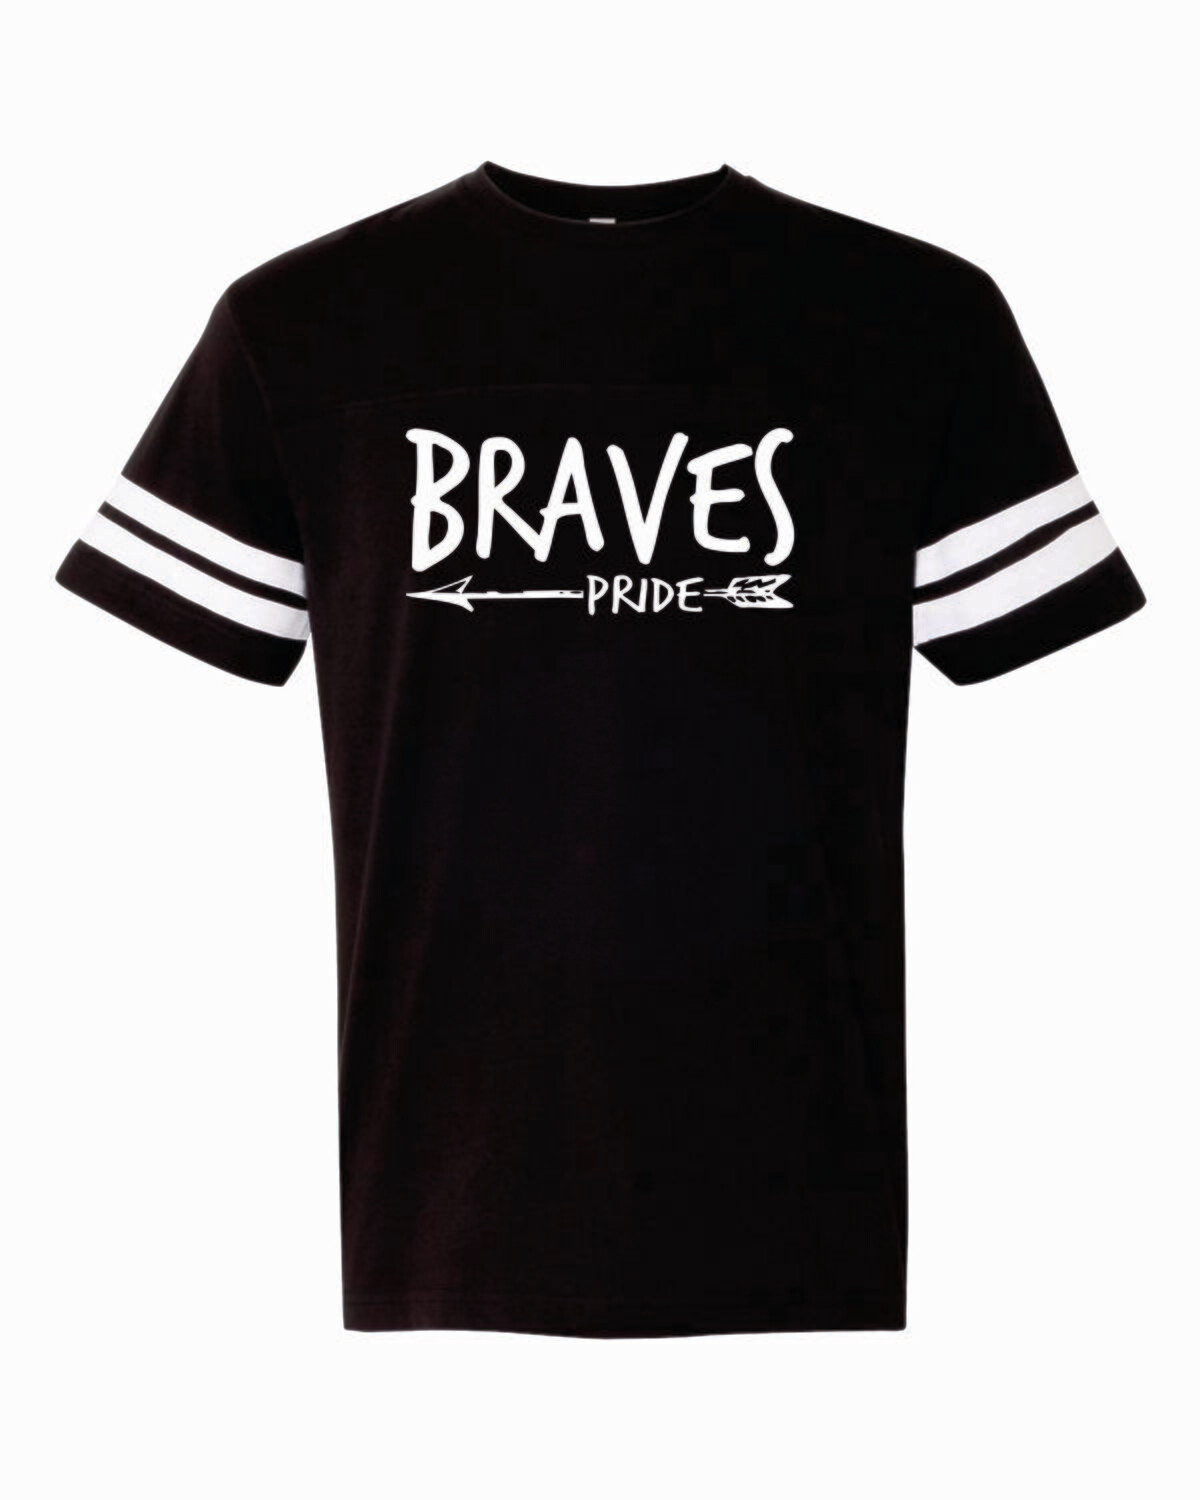 BRAVES PRIDE Football Tee, 2 colors available